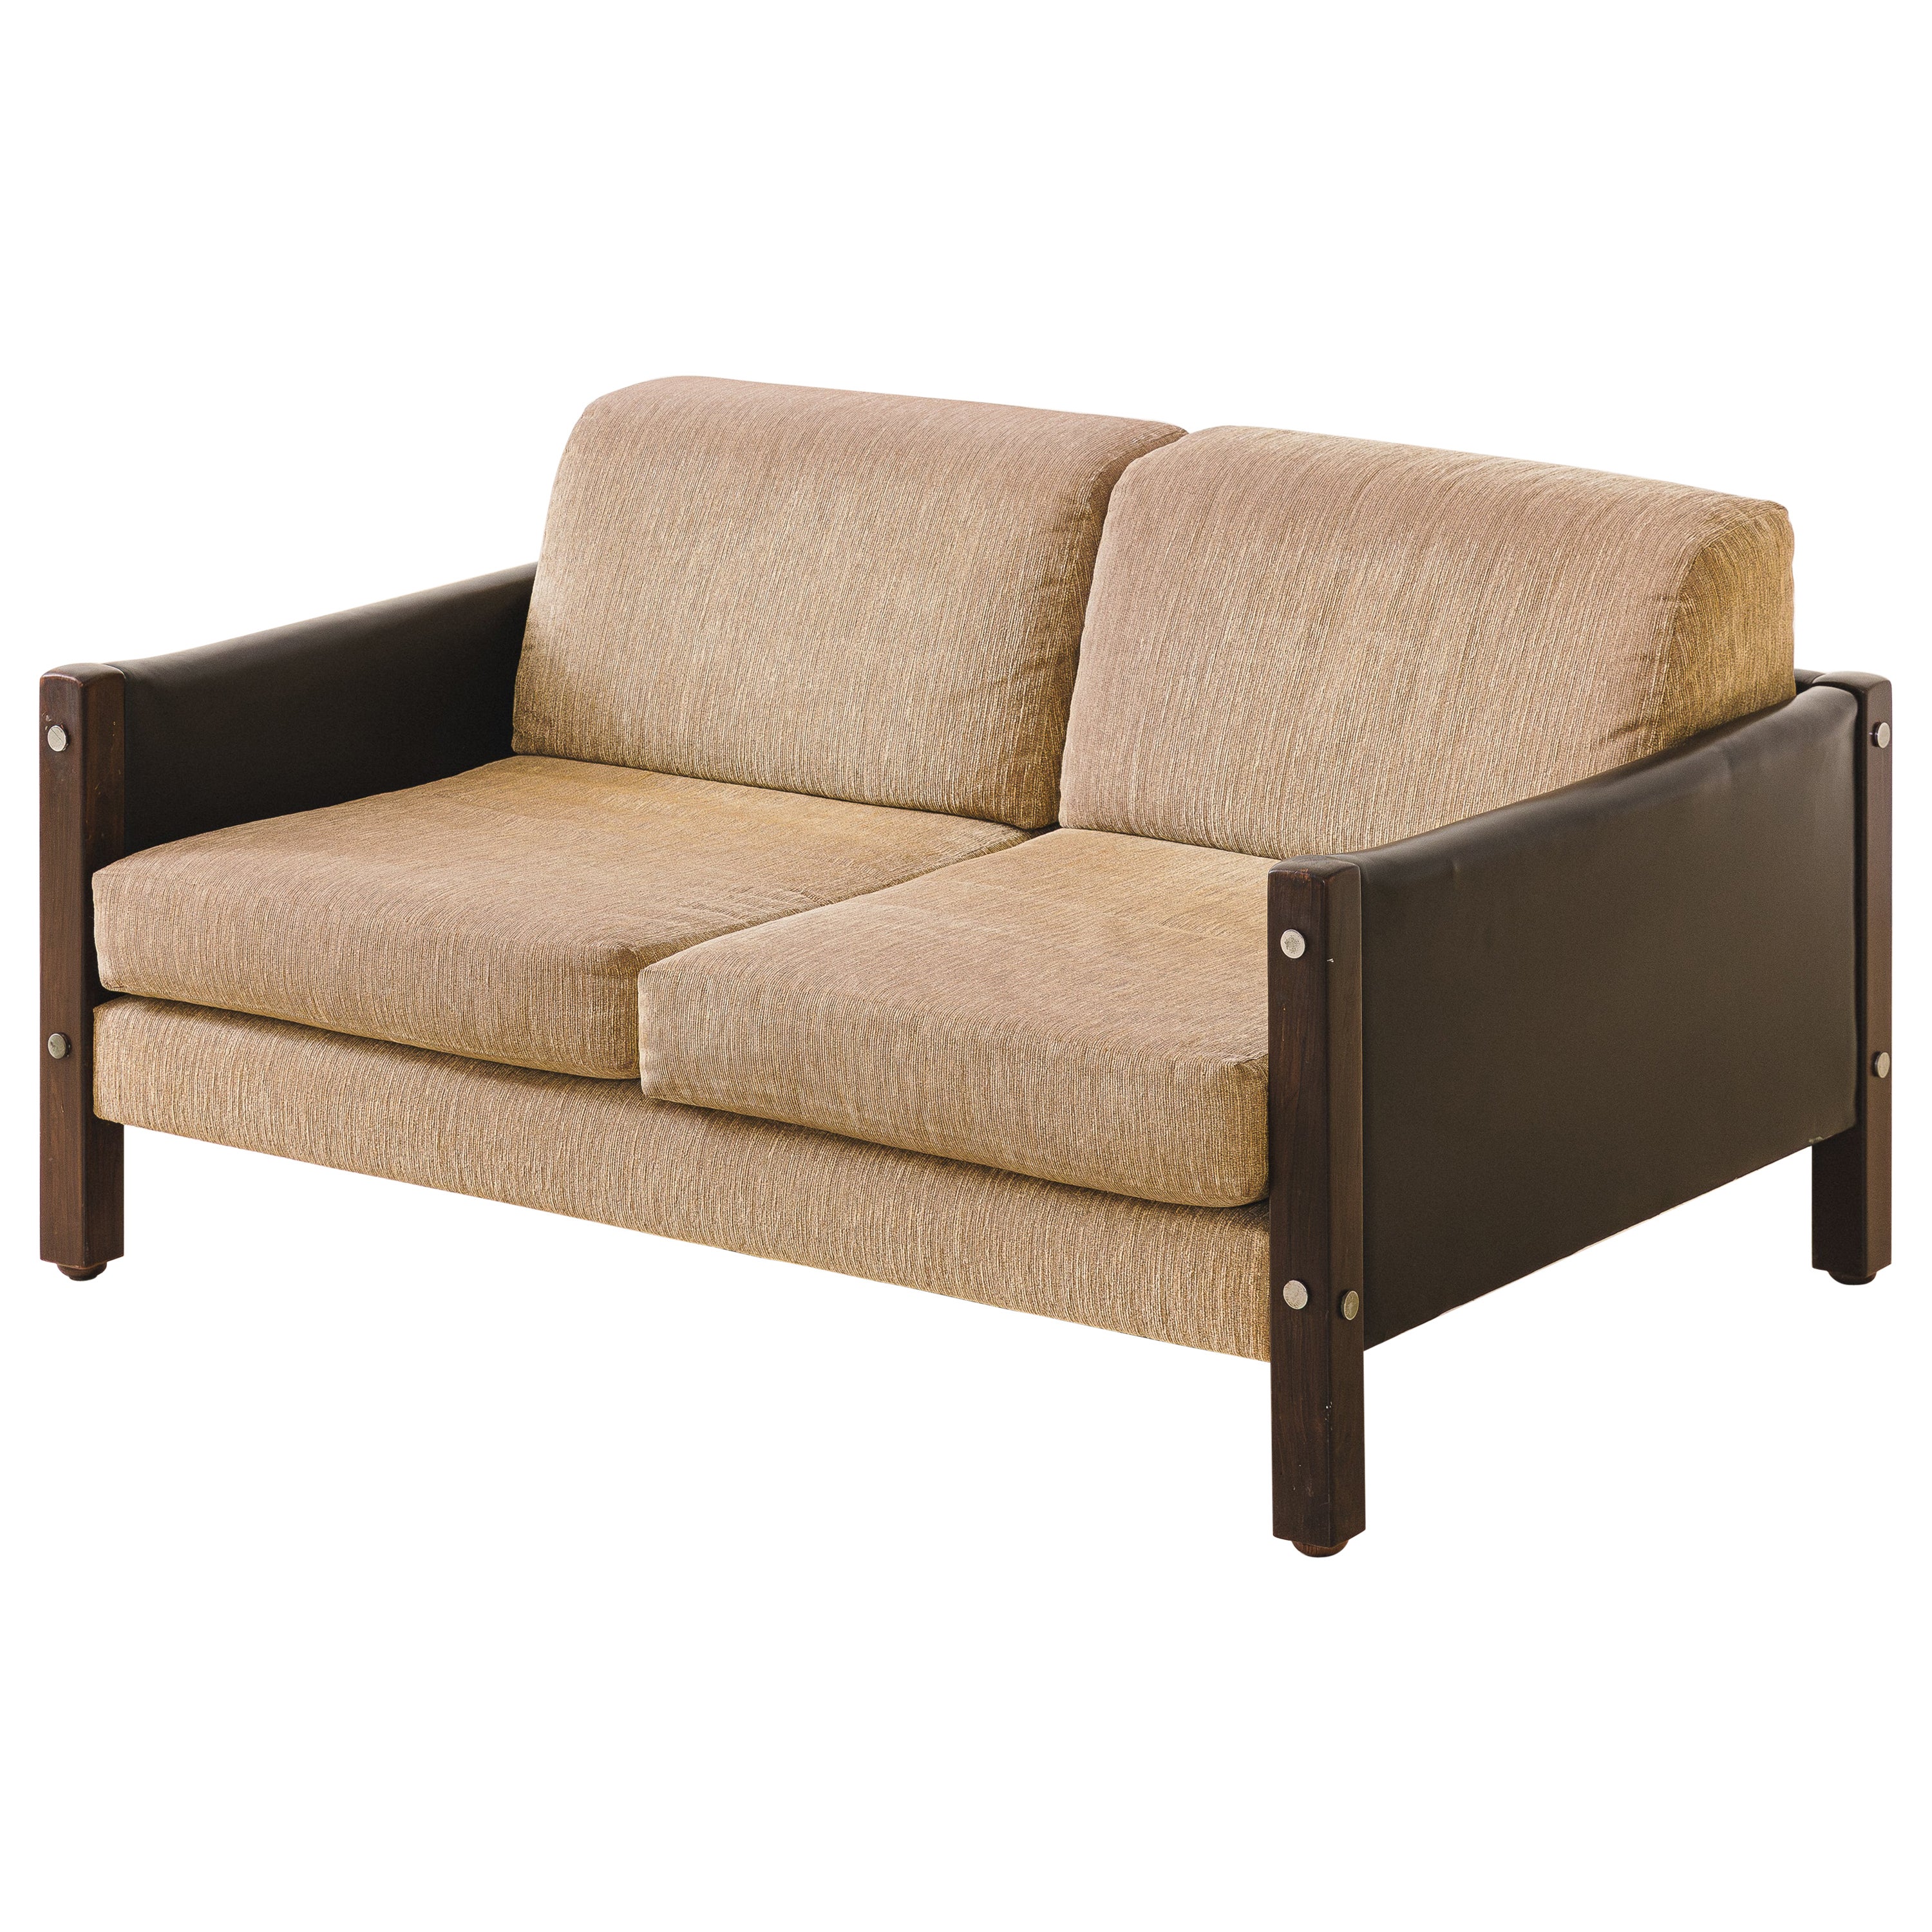 Rosewood Two-Seat Millor Sofa, Sergio Rodrigues Modern Design, Brazil, 1960s For Sale